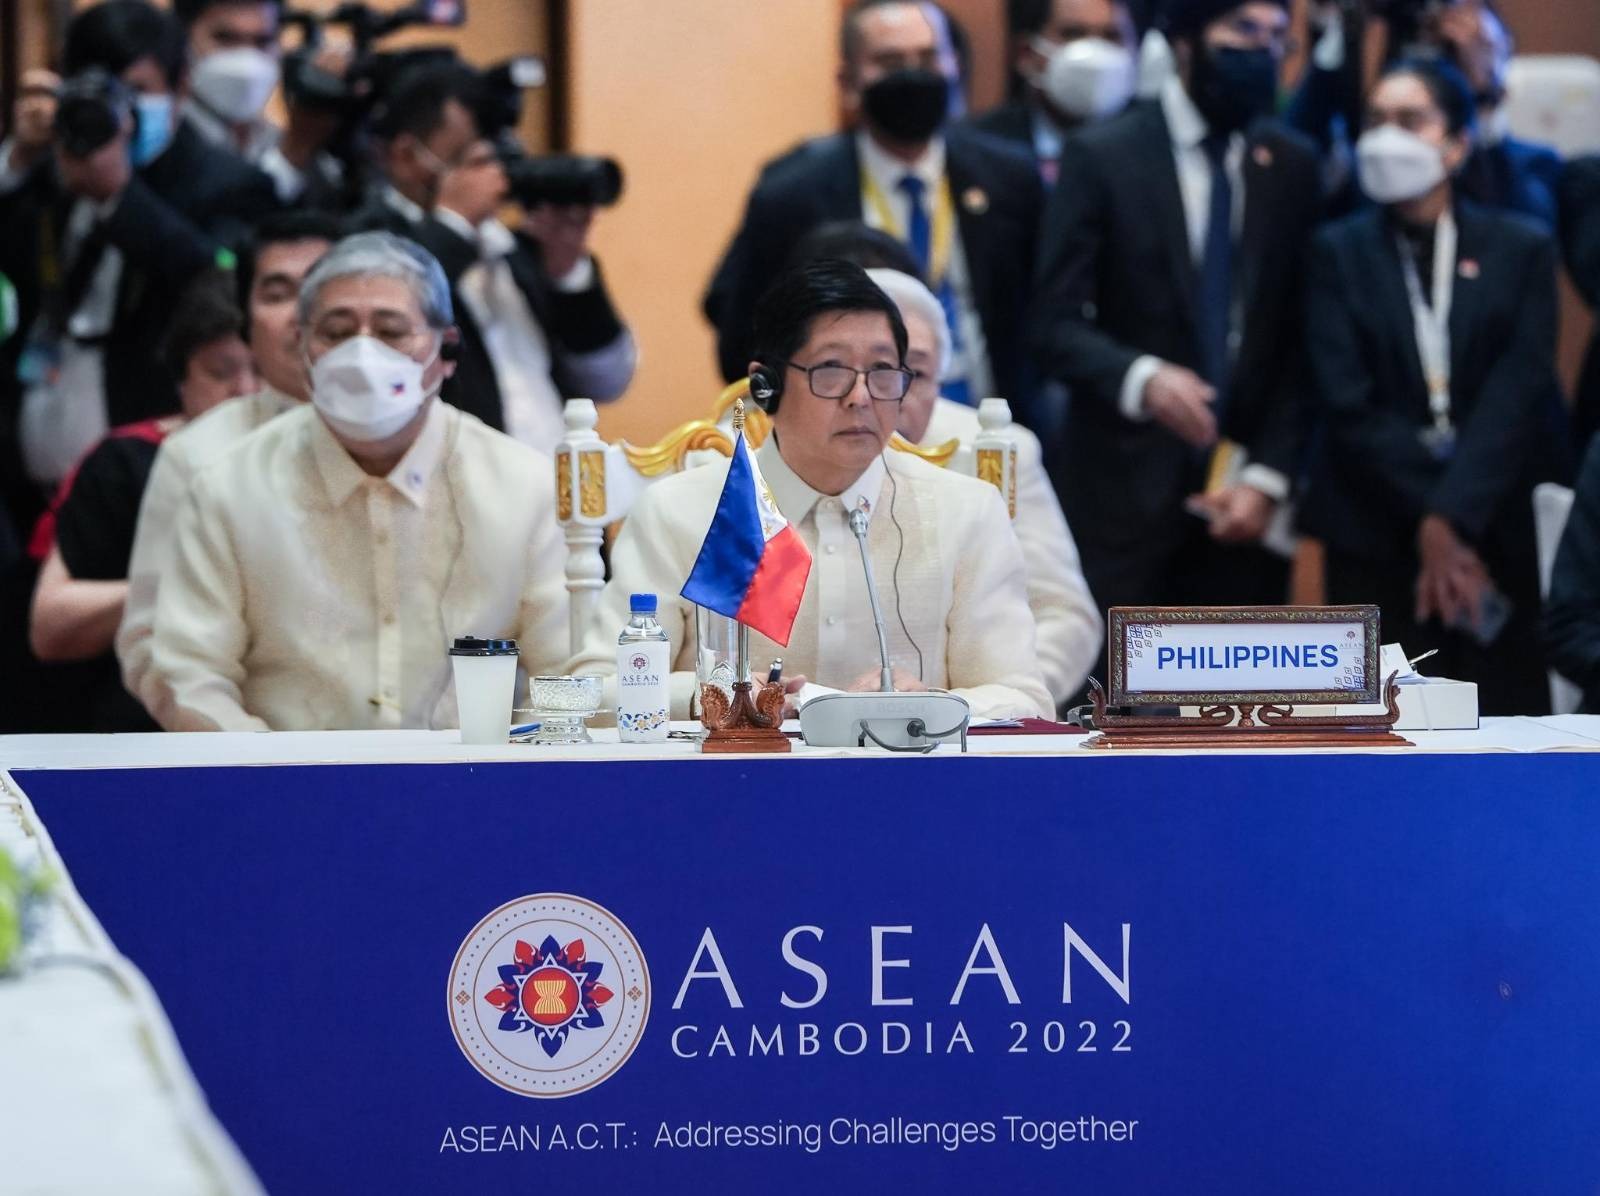 President Ferdinand Marcos Jr. has called for the continuation of the Association of Southeast Asian Nations (Asean) and the United States’ cooperation in addressing maritime security and transnational crime.